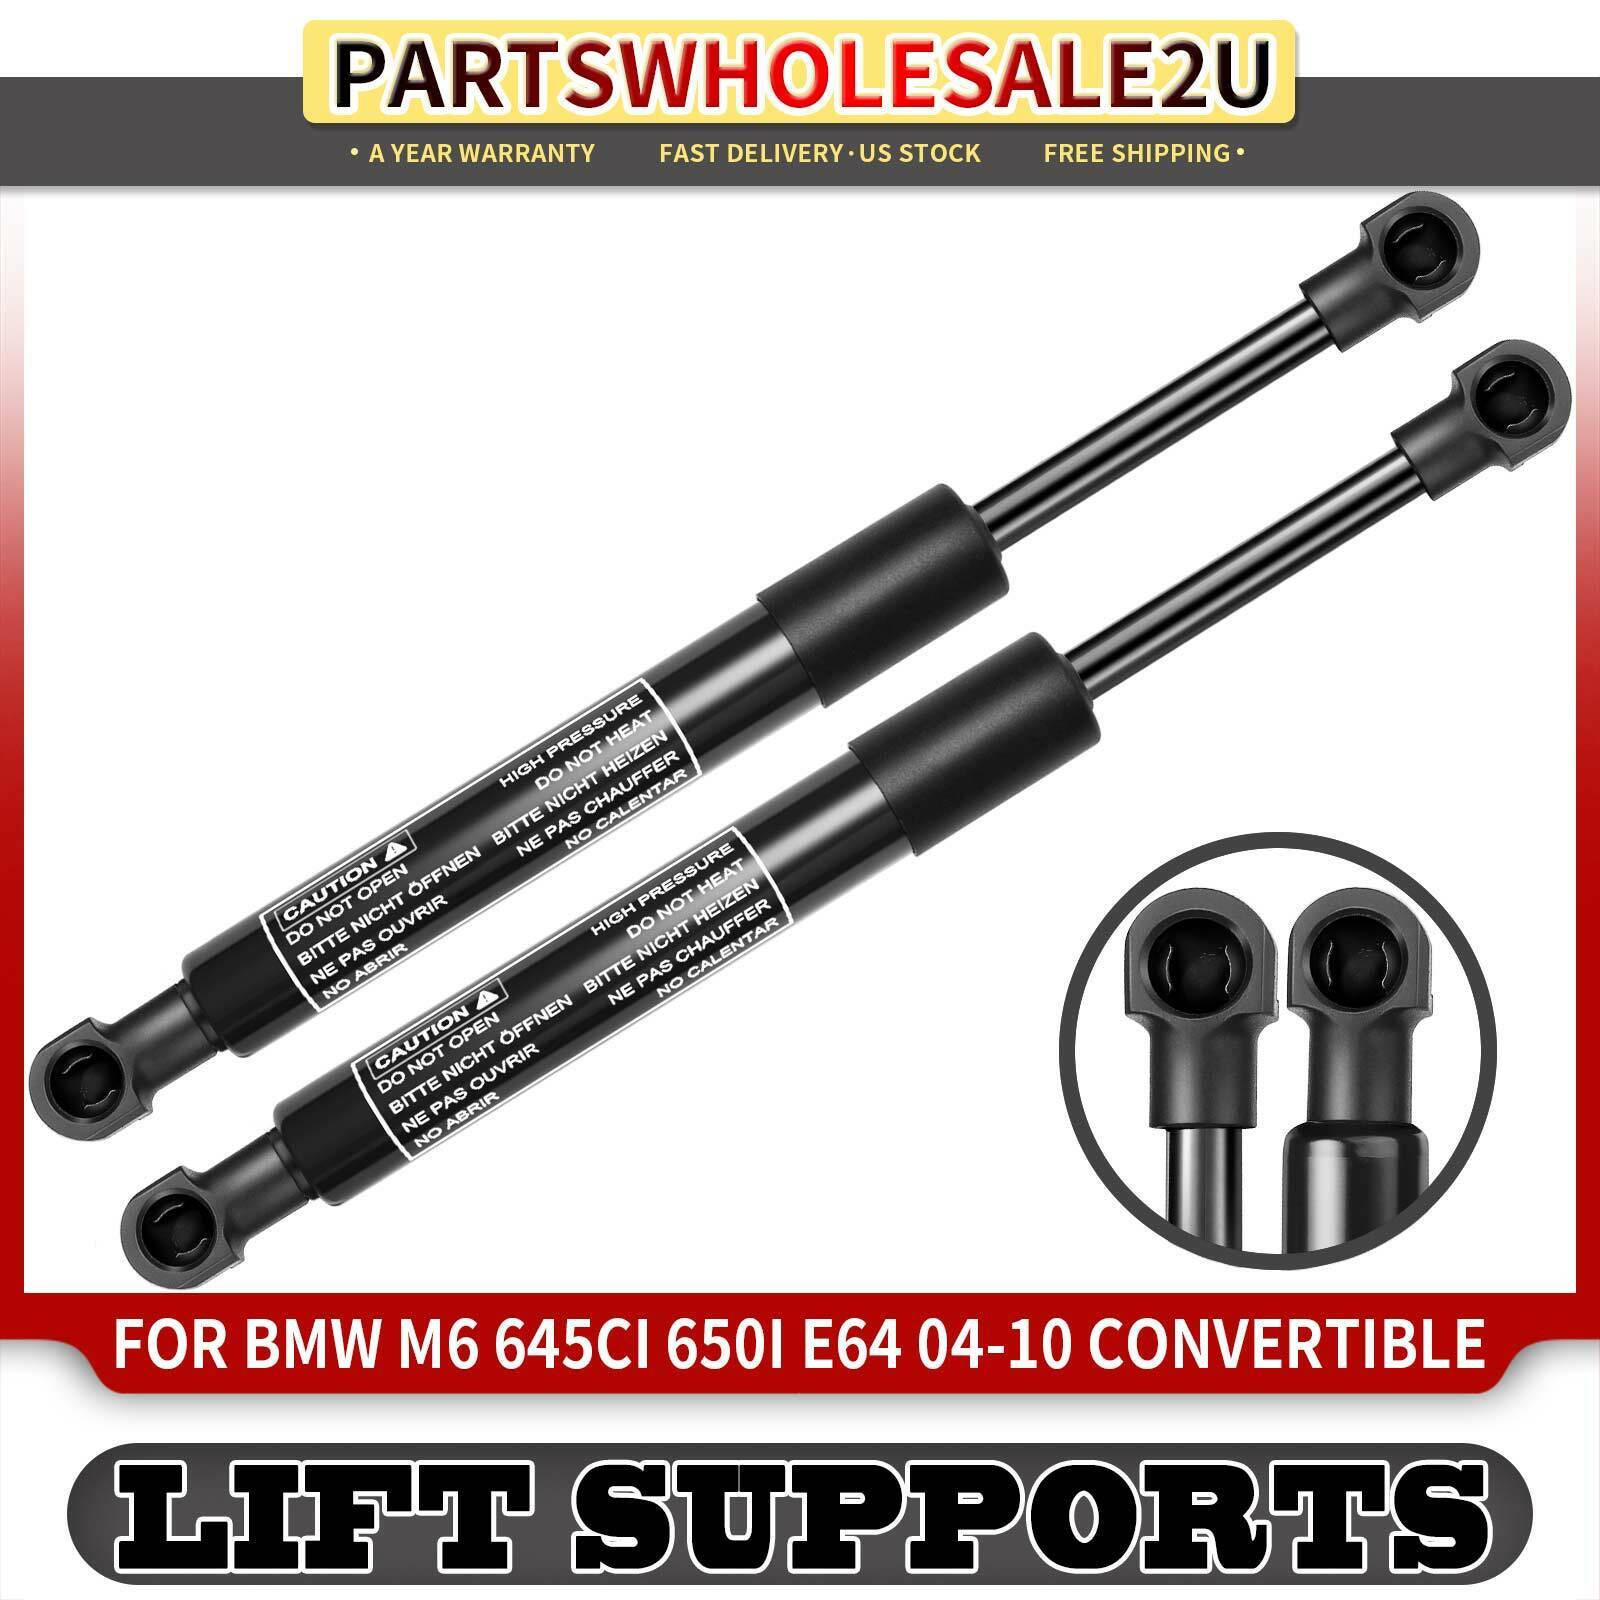 2x Rear Trunk Lift Supports Shocks Struts for BMW E64 M6 Convertible 2004-2010